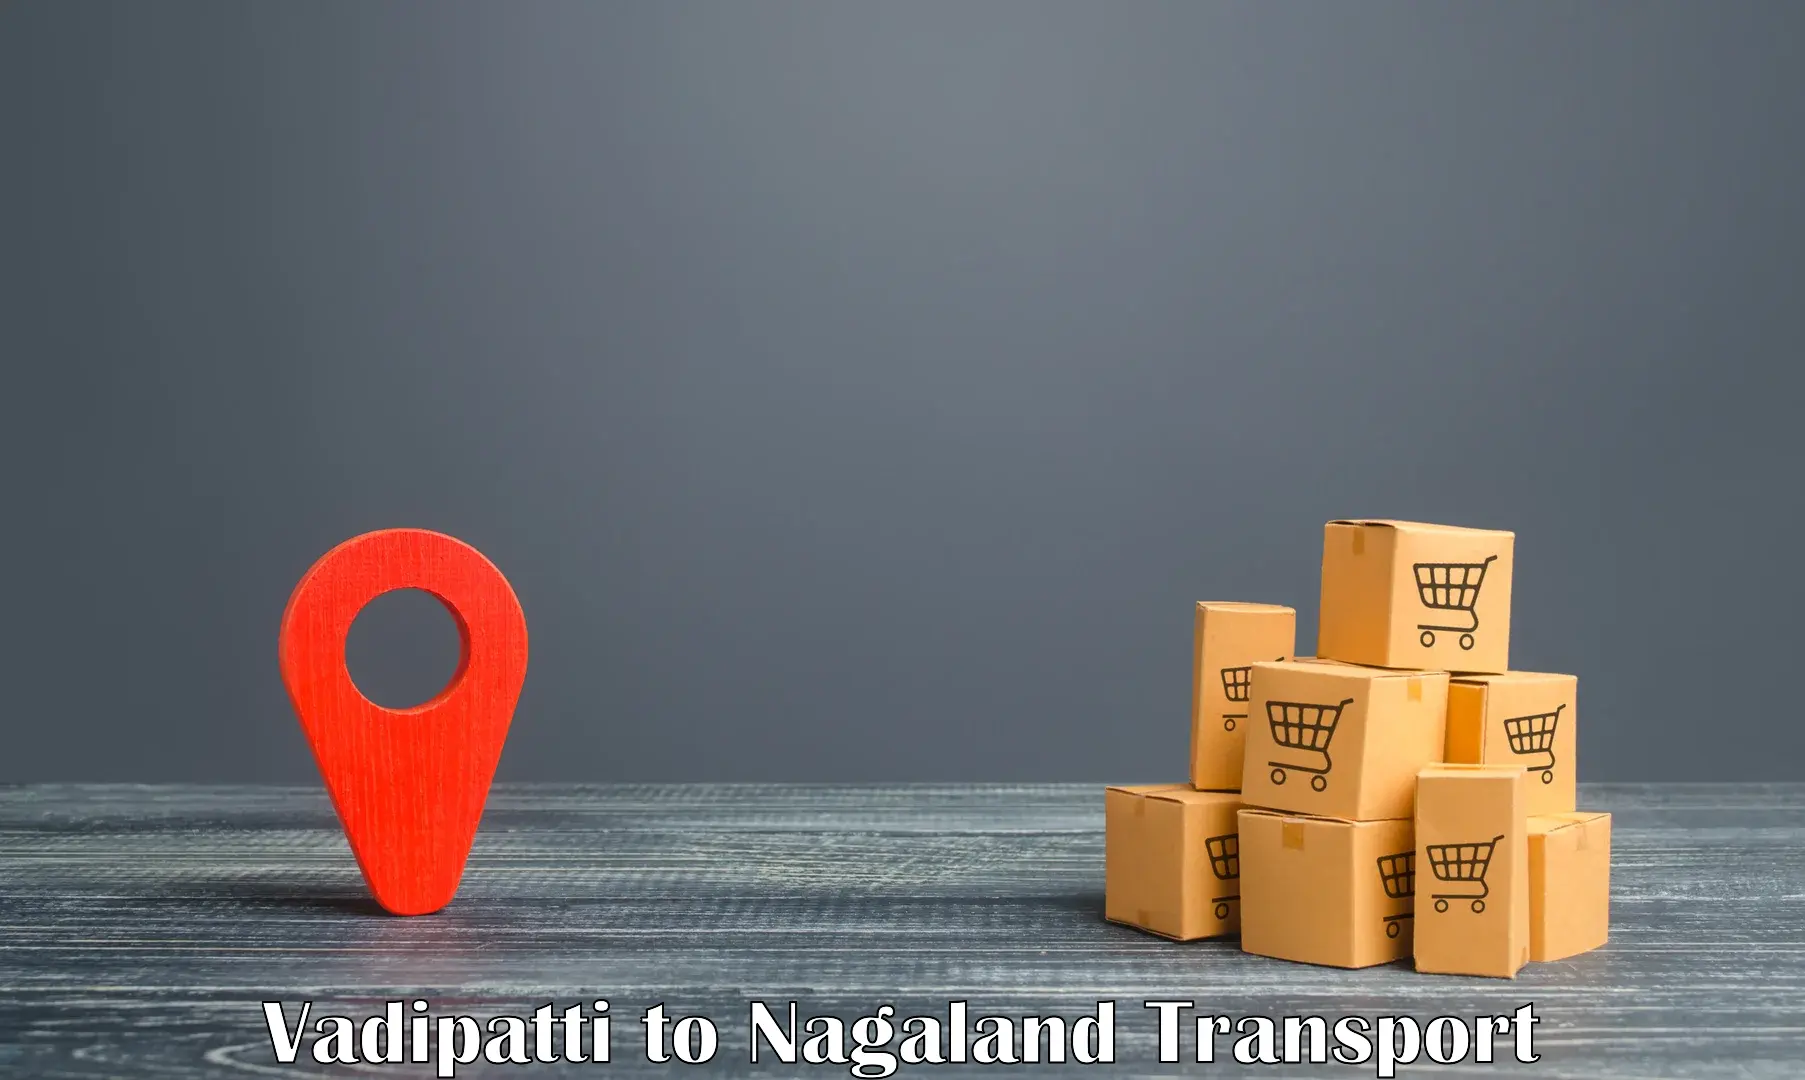 Container transport service Vadipatti to Nagaland